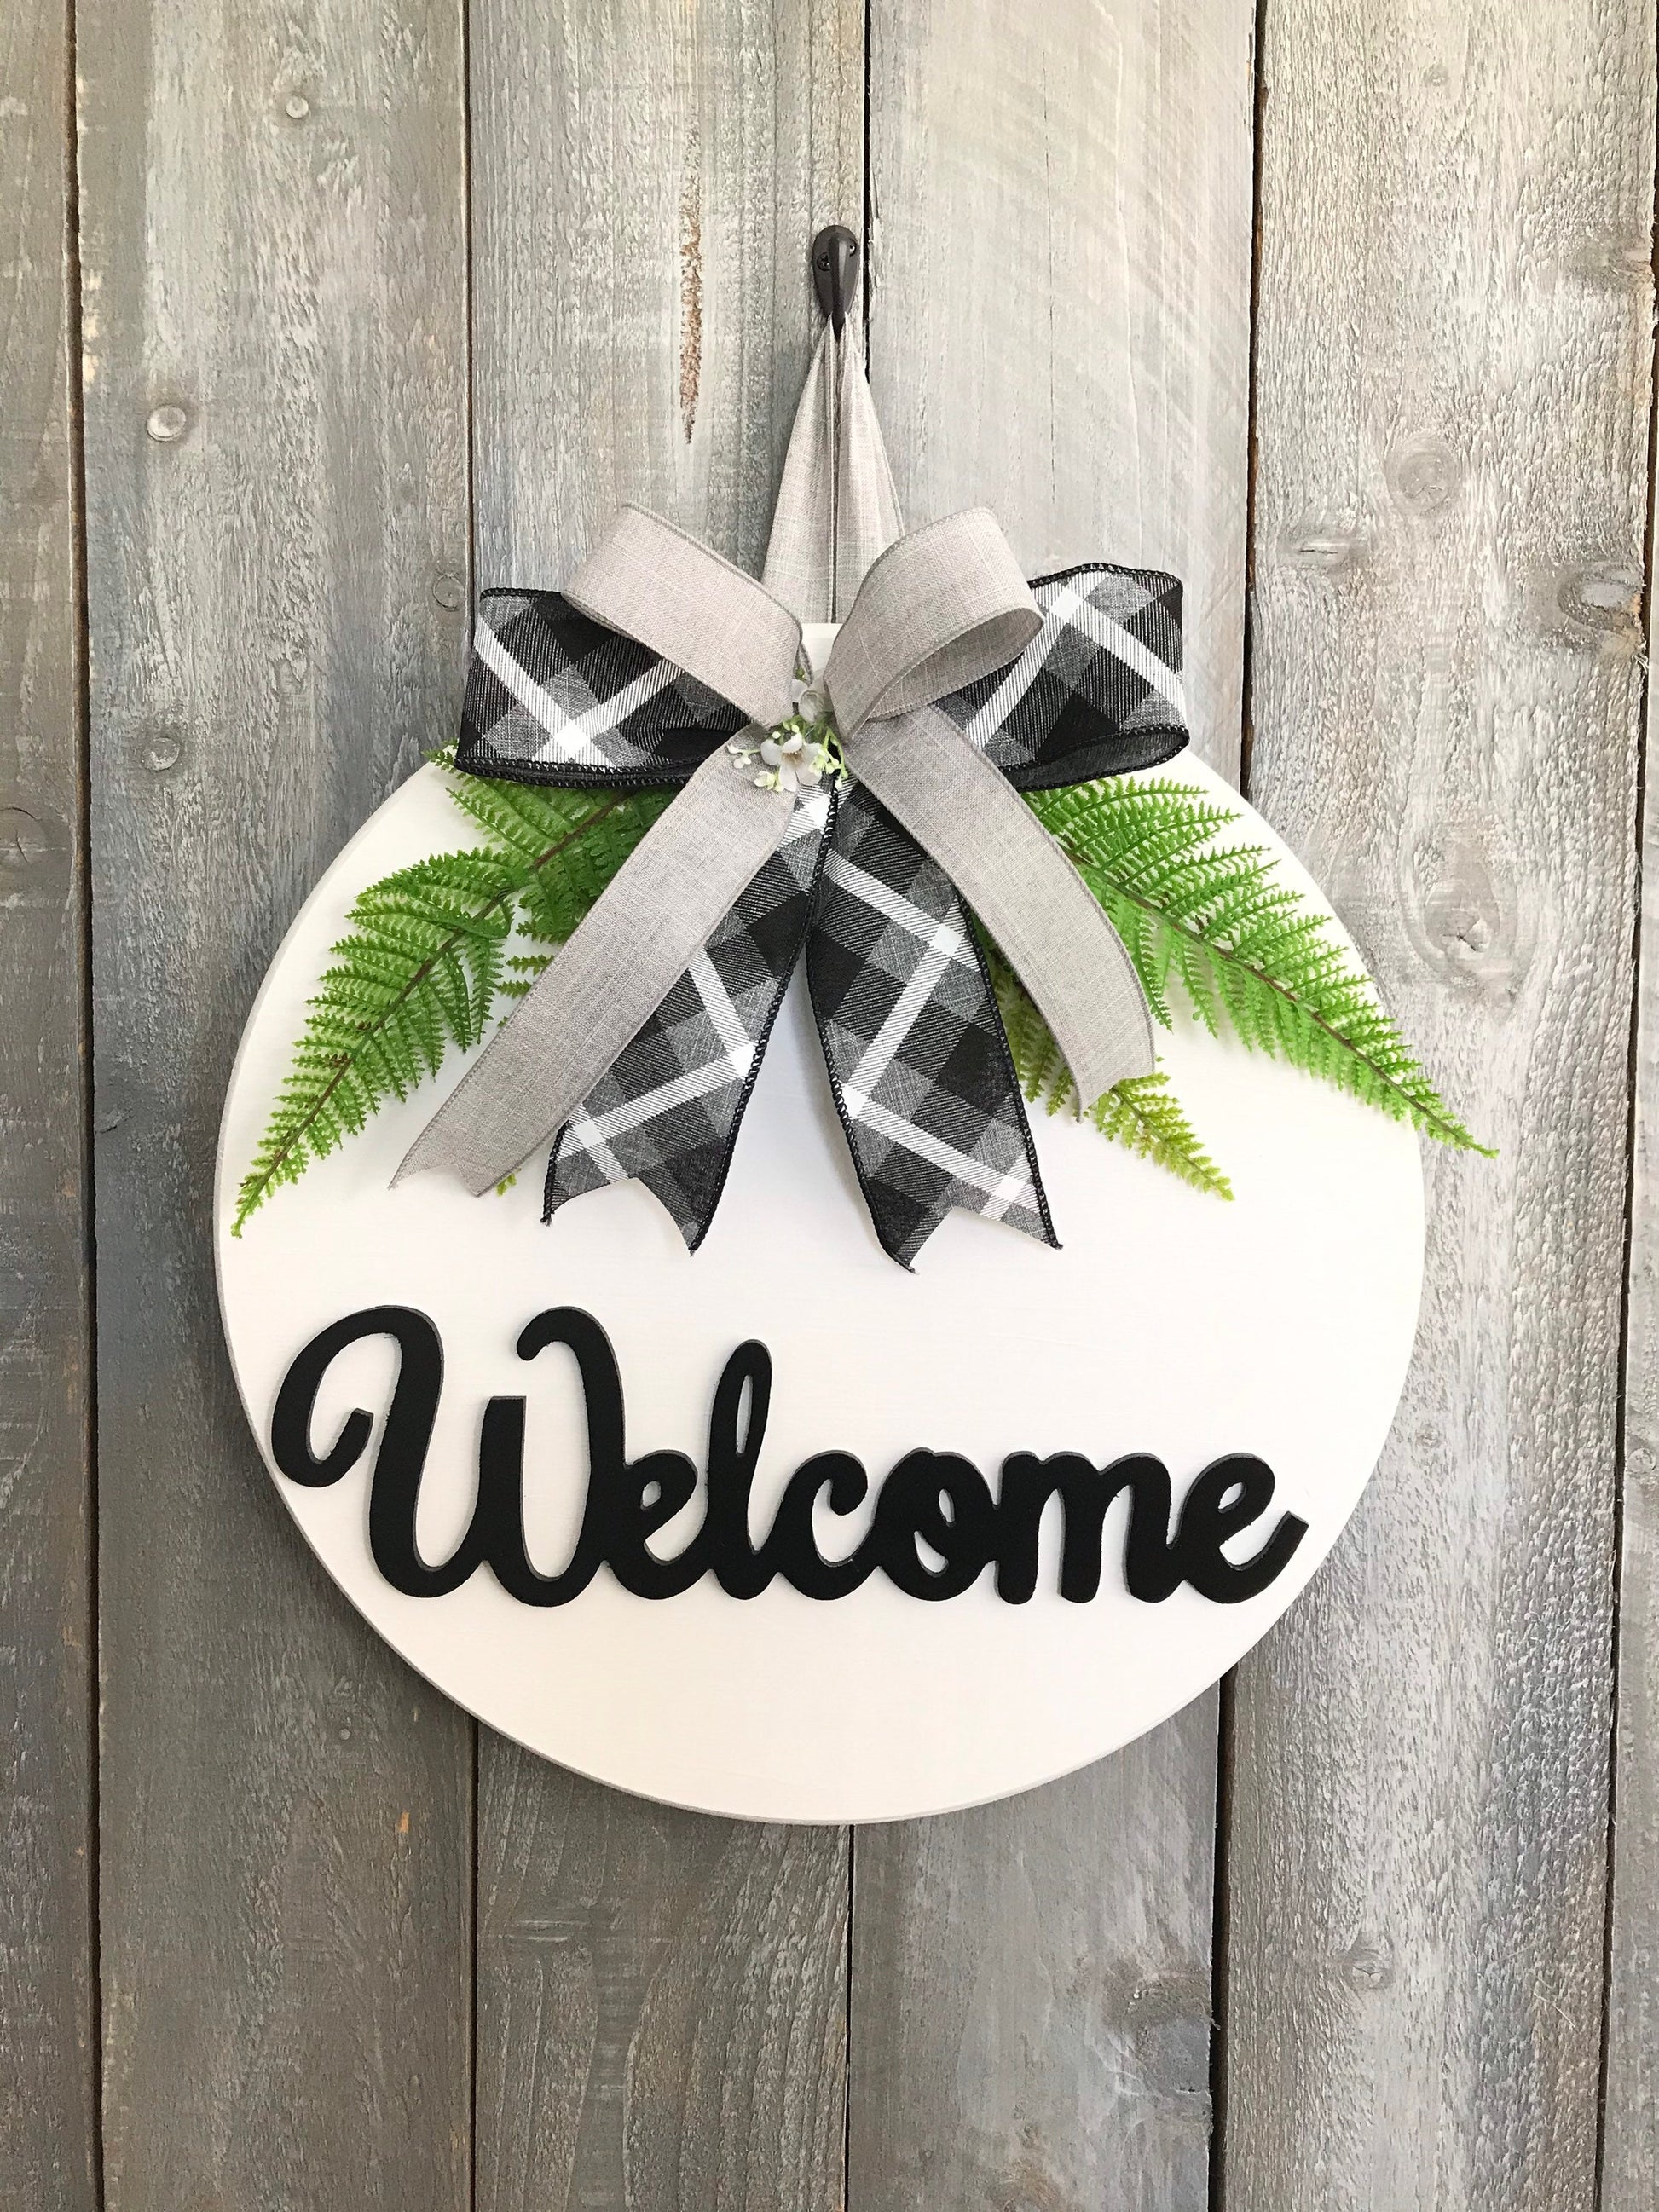 Solid Wood Modern White Welcome Sign for Front Door or Porch, Minimalist Wooden Welcome Door Hanger, Black and White Outdoor Plaque